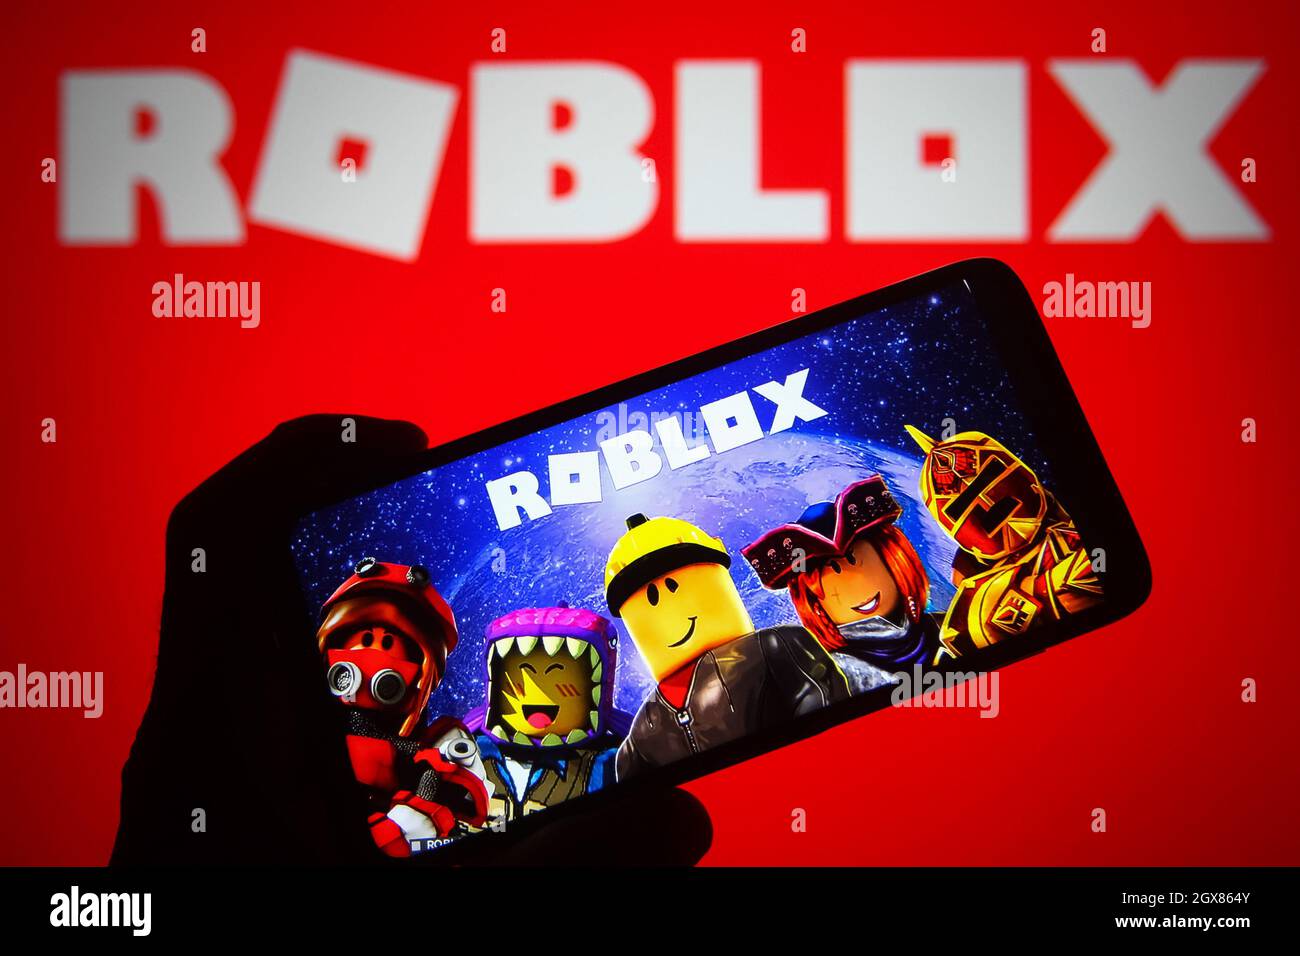 Milan, Italy - August 20, 2018: Roblox website homepage. Roblox logo  visible Stock Photo - Alamy